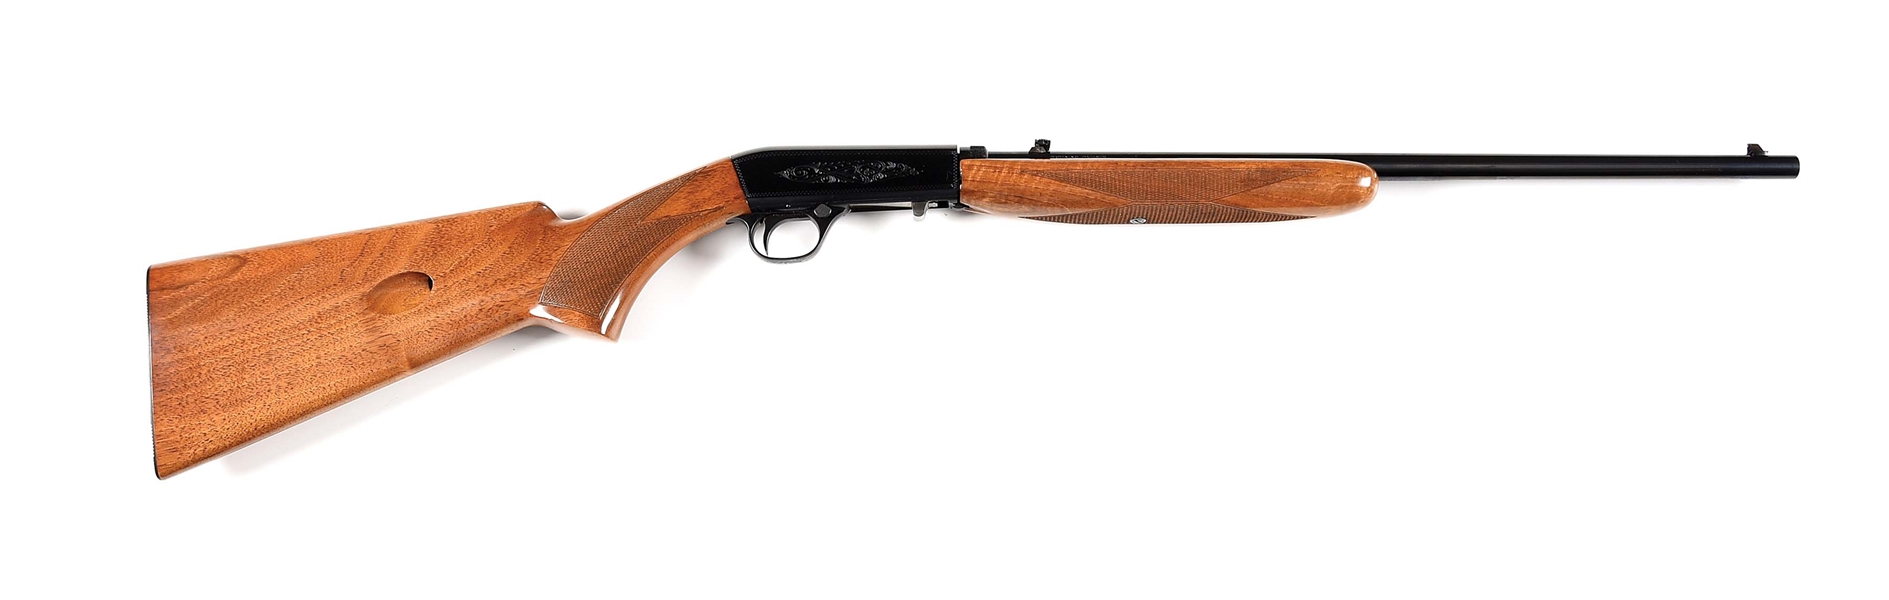 (C) BROWNING AUTO 22 SEMI-AUTOMATIC RIFLE WITH FACTORY HARD CASE. 